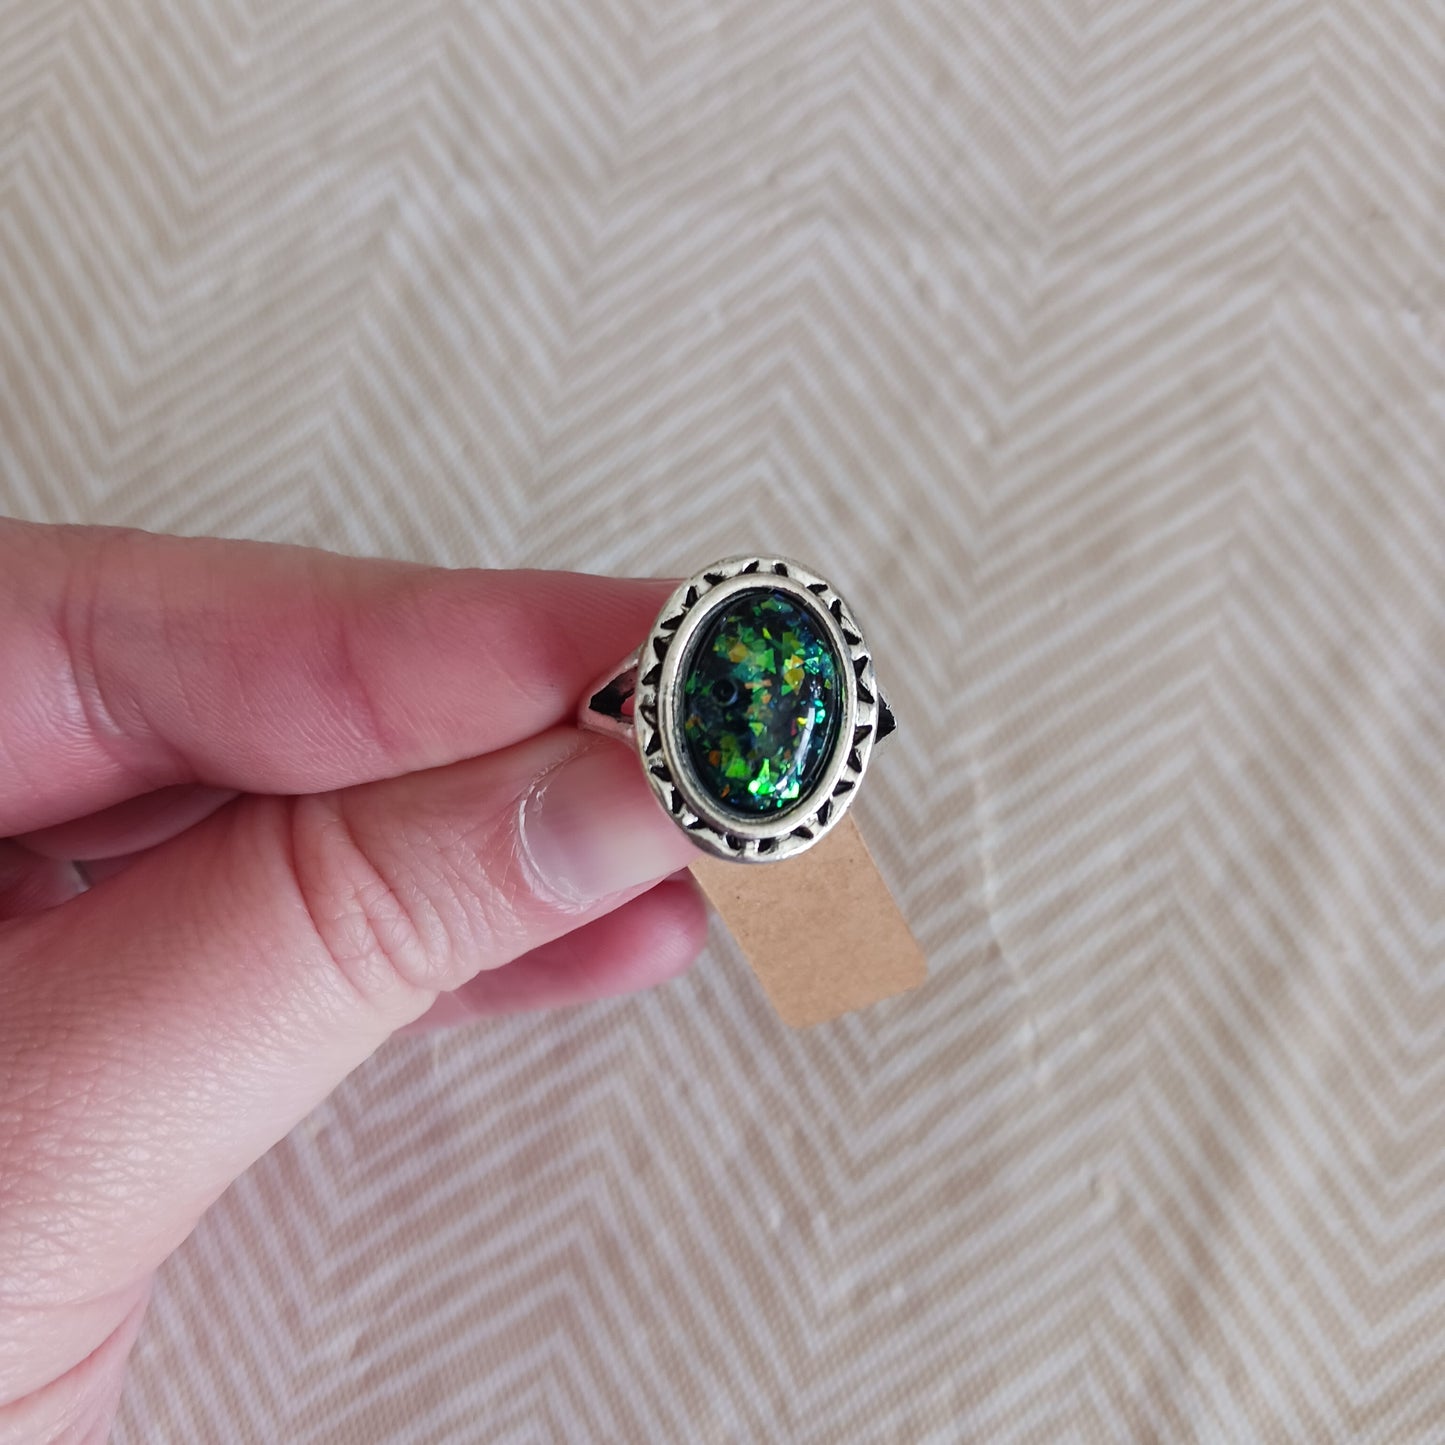 Green and Black Fashion Ring Oval